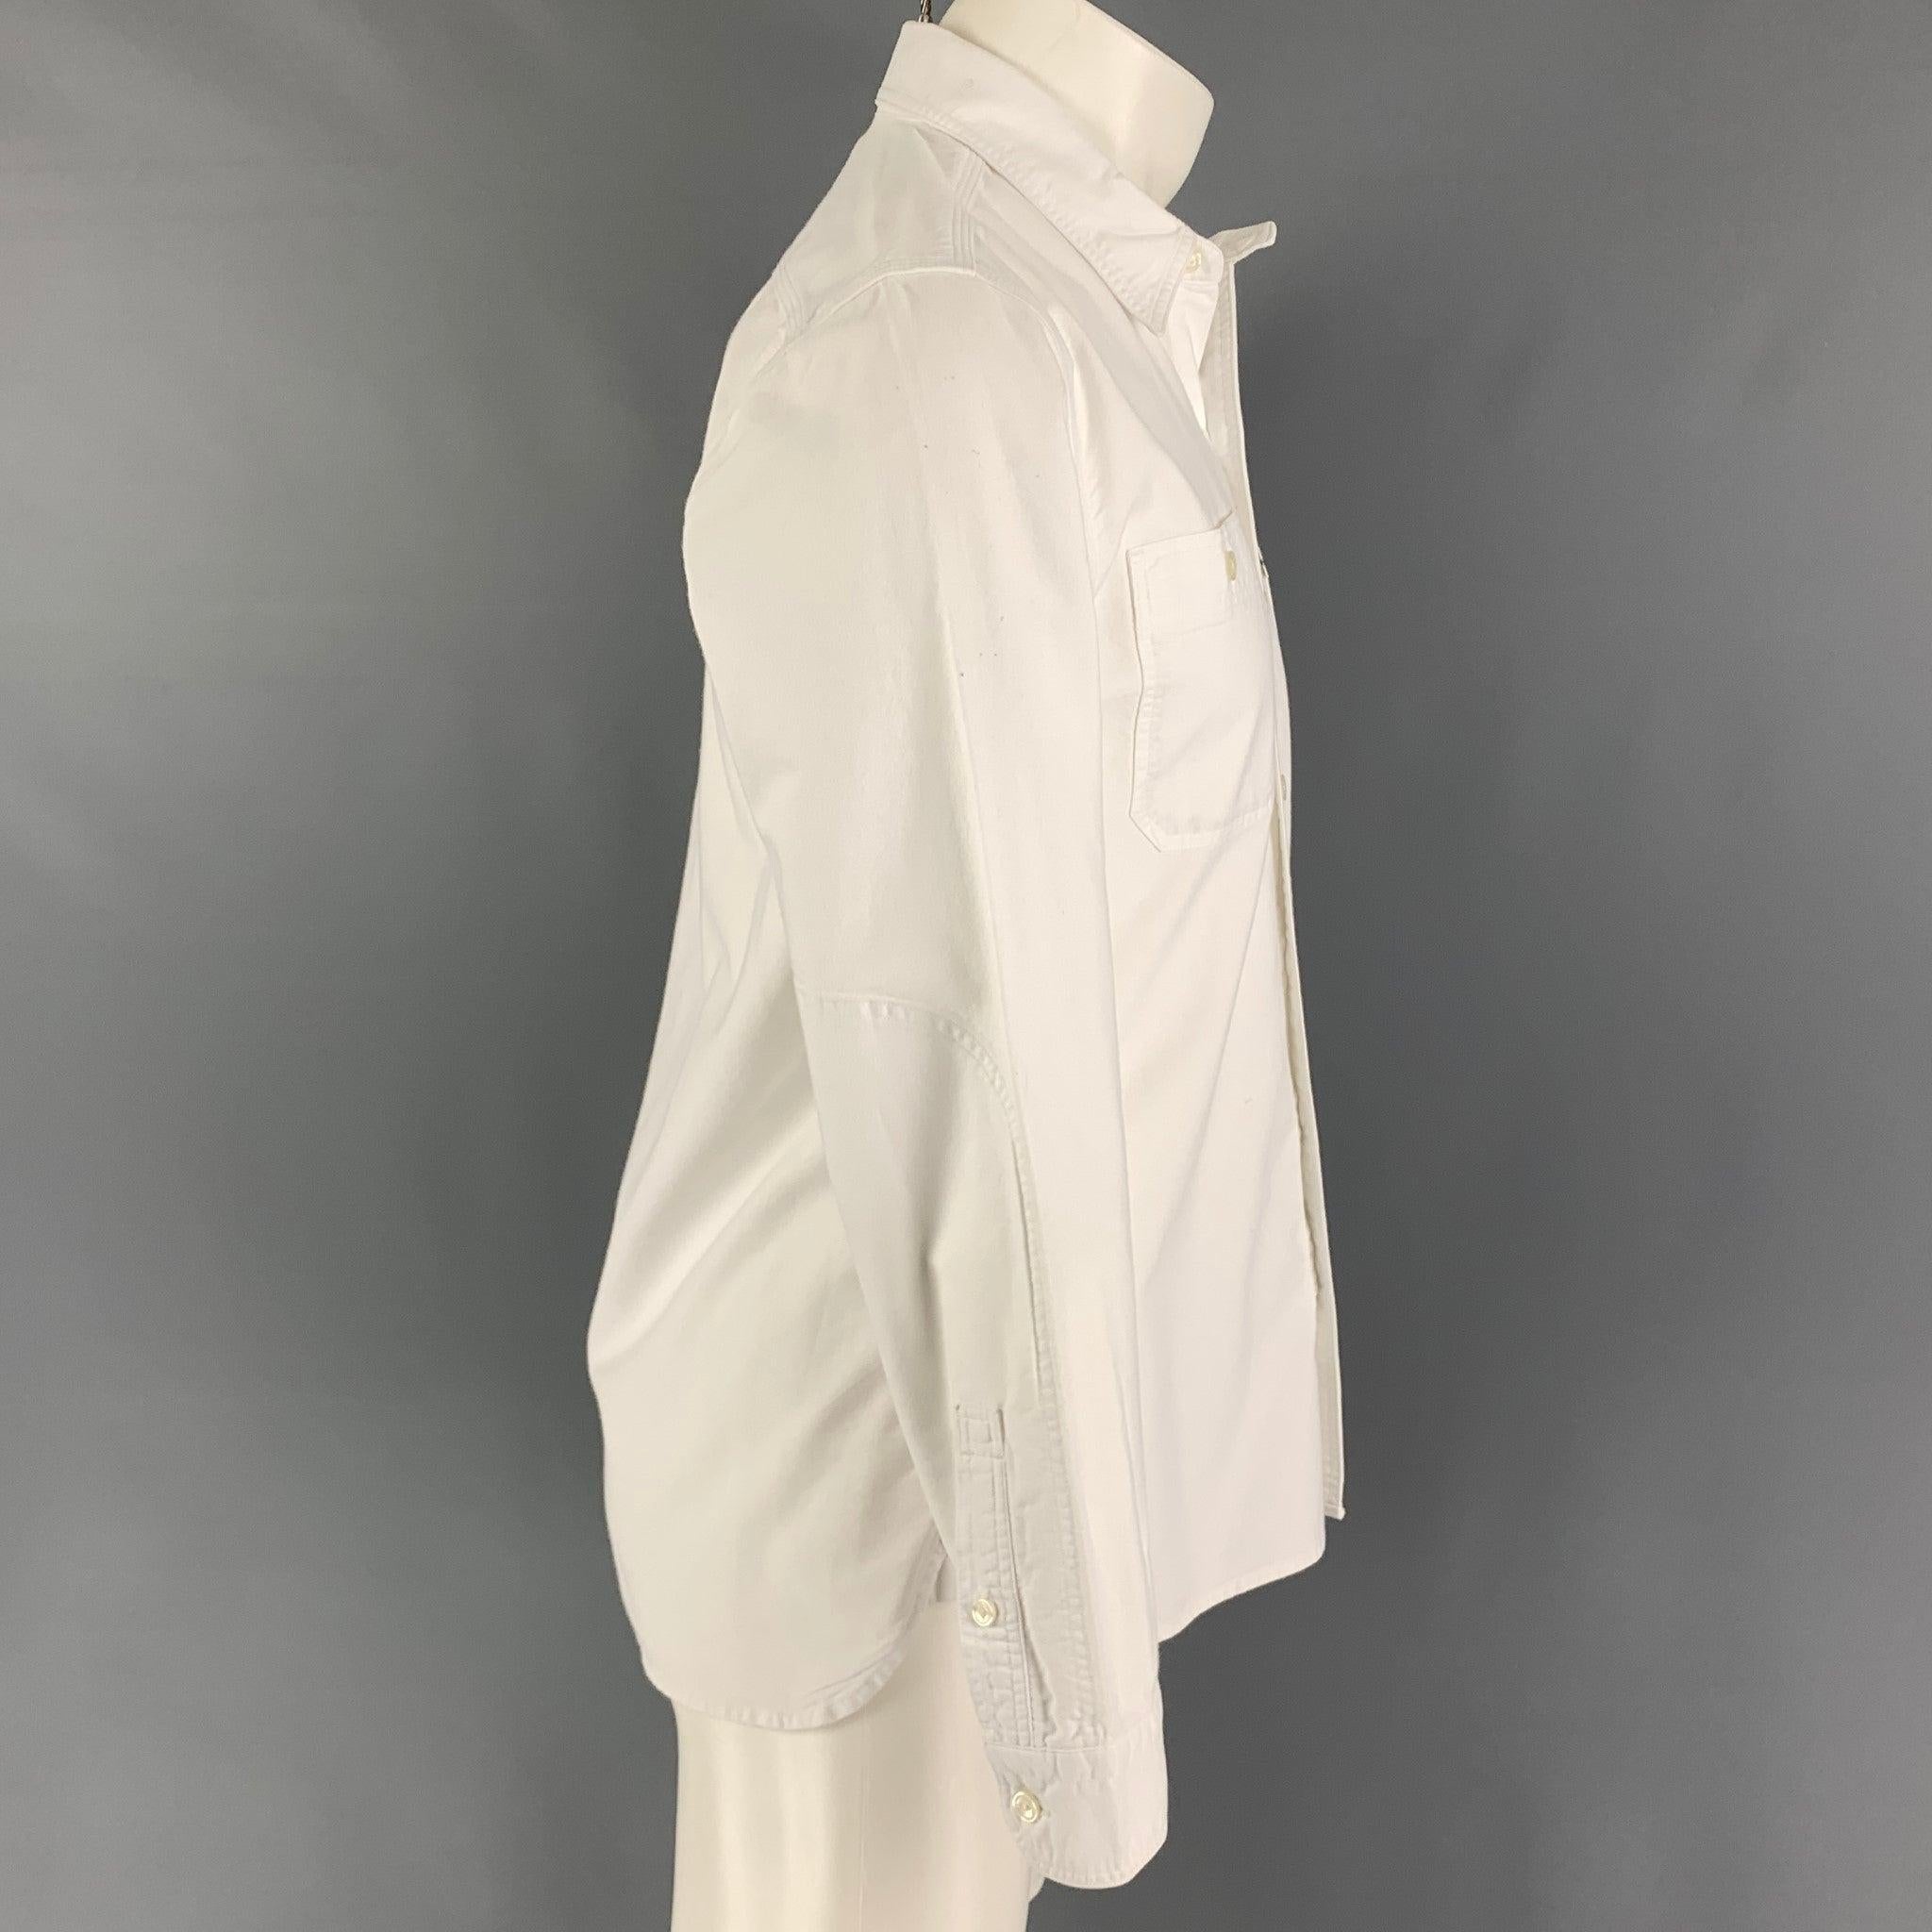 LEVI'S long sleeve shirt comes in a white cotton featuring a spread cotton, patch pockets, and a button up closure.
Good Pre-Owned Condition. Light marks at back. As-is. 

Marked:   M  

Measurements: 
 
Shoulder: 17 inches Chest: 40 inches Sleeve: